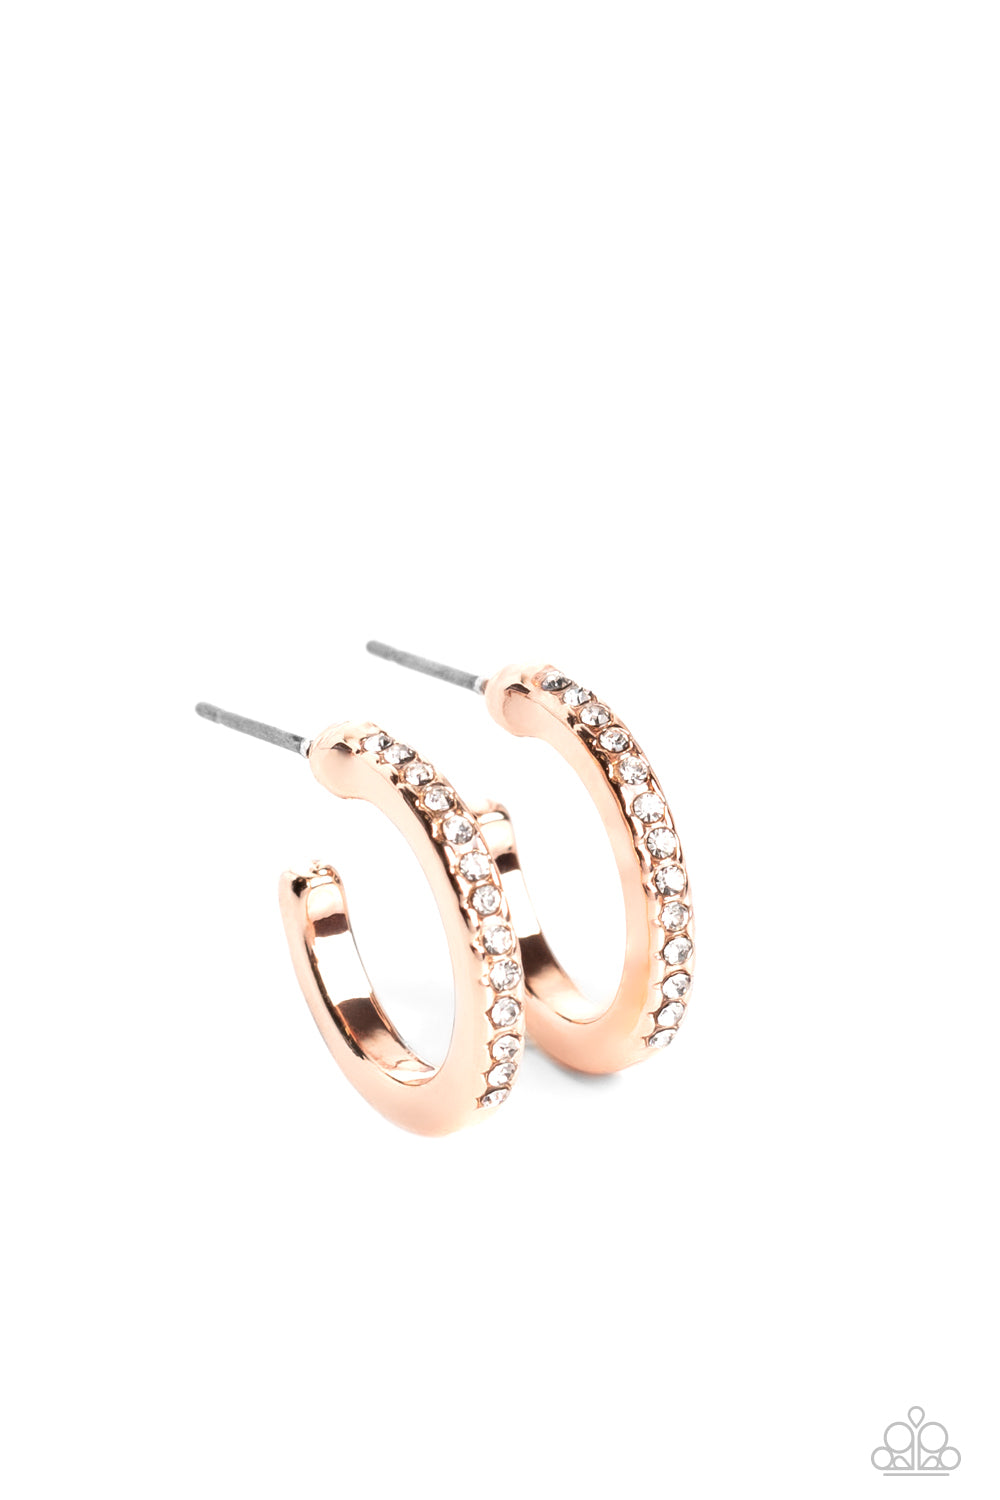 Audaciously Angelic - Rose Gold Earrings